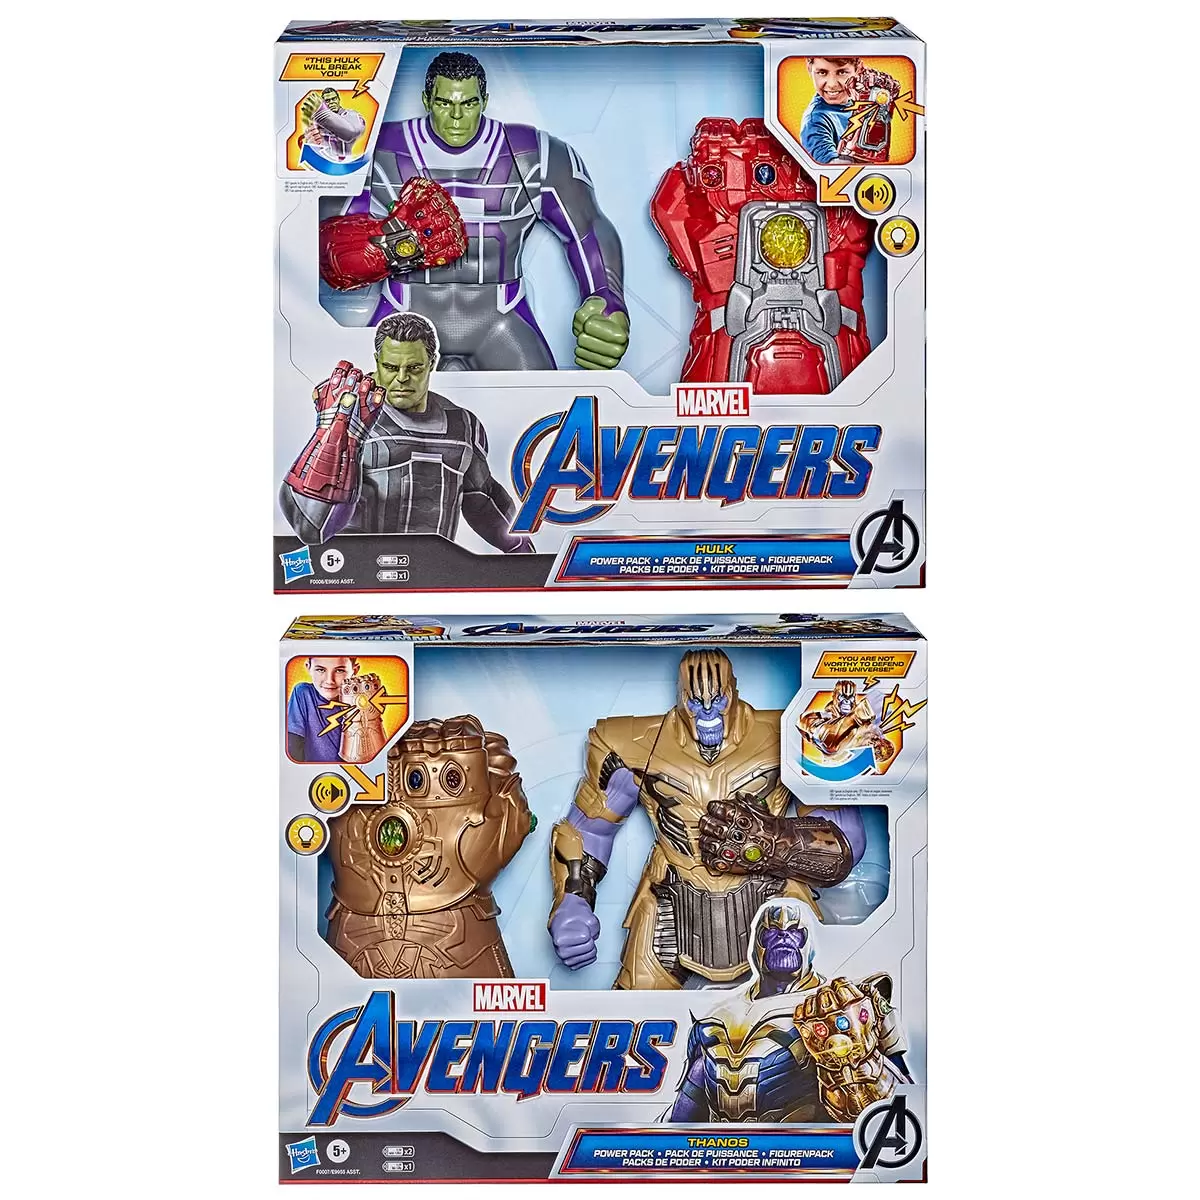 Buy Marvel Avengers Power Punch Combined Box Image at Costco.co.uk